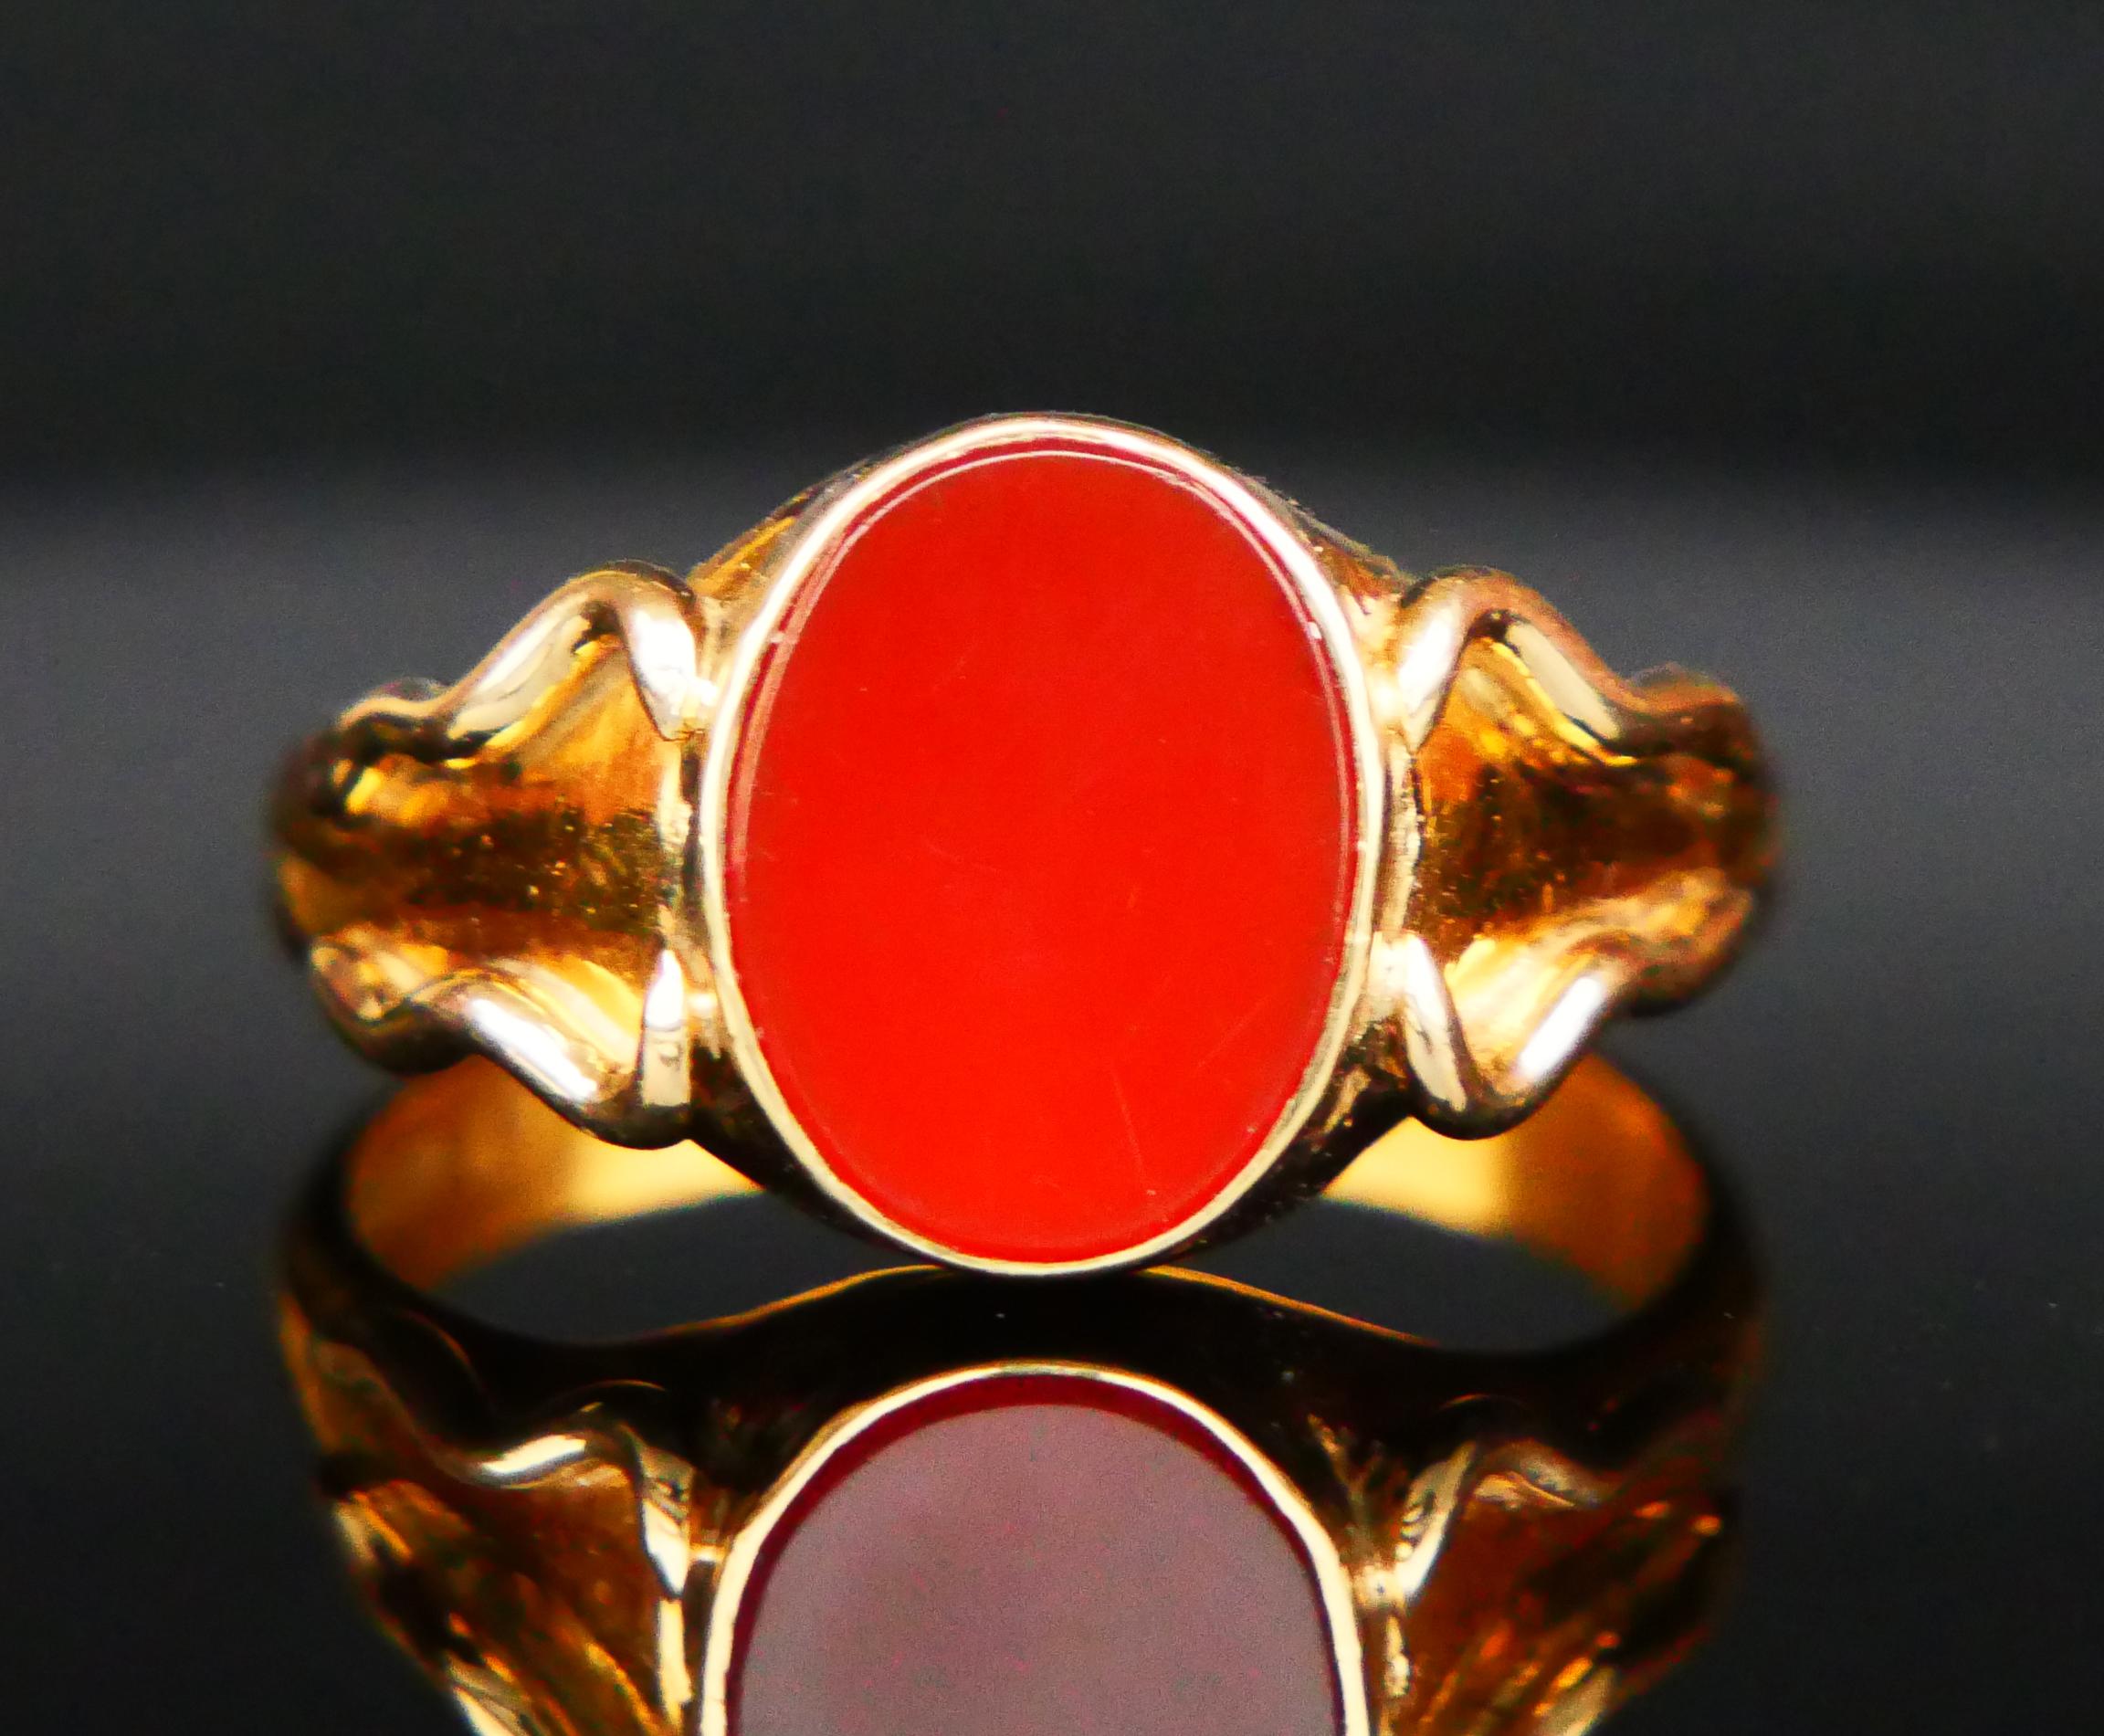 Signet Ring for Men or Women crafted in solid 23K Gold with dark Red plate of Carnelian stone 13 mm x 10 mm x 2.75 deep / ca 3 ct. Stone has well polished flat surface. Shoulders with wavy ornaments. The band is 4mm wide.

Swedish hallmarks, 23K,